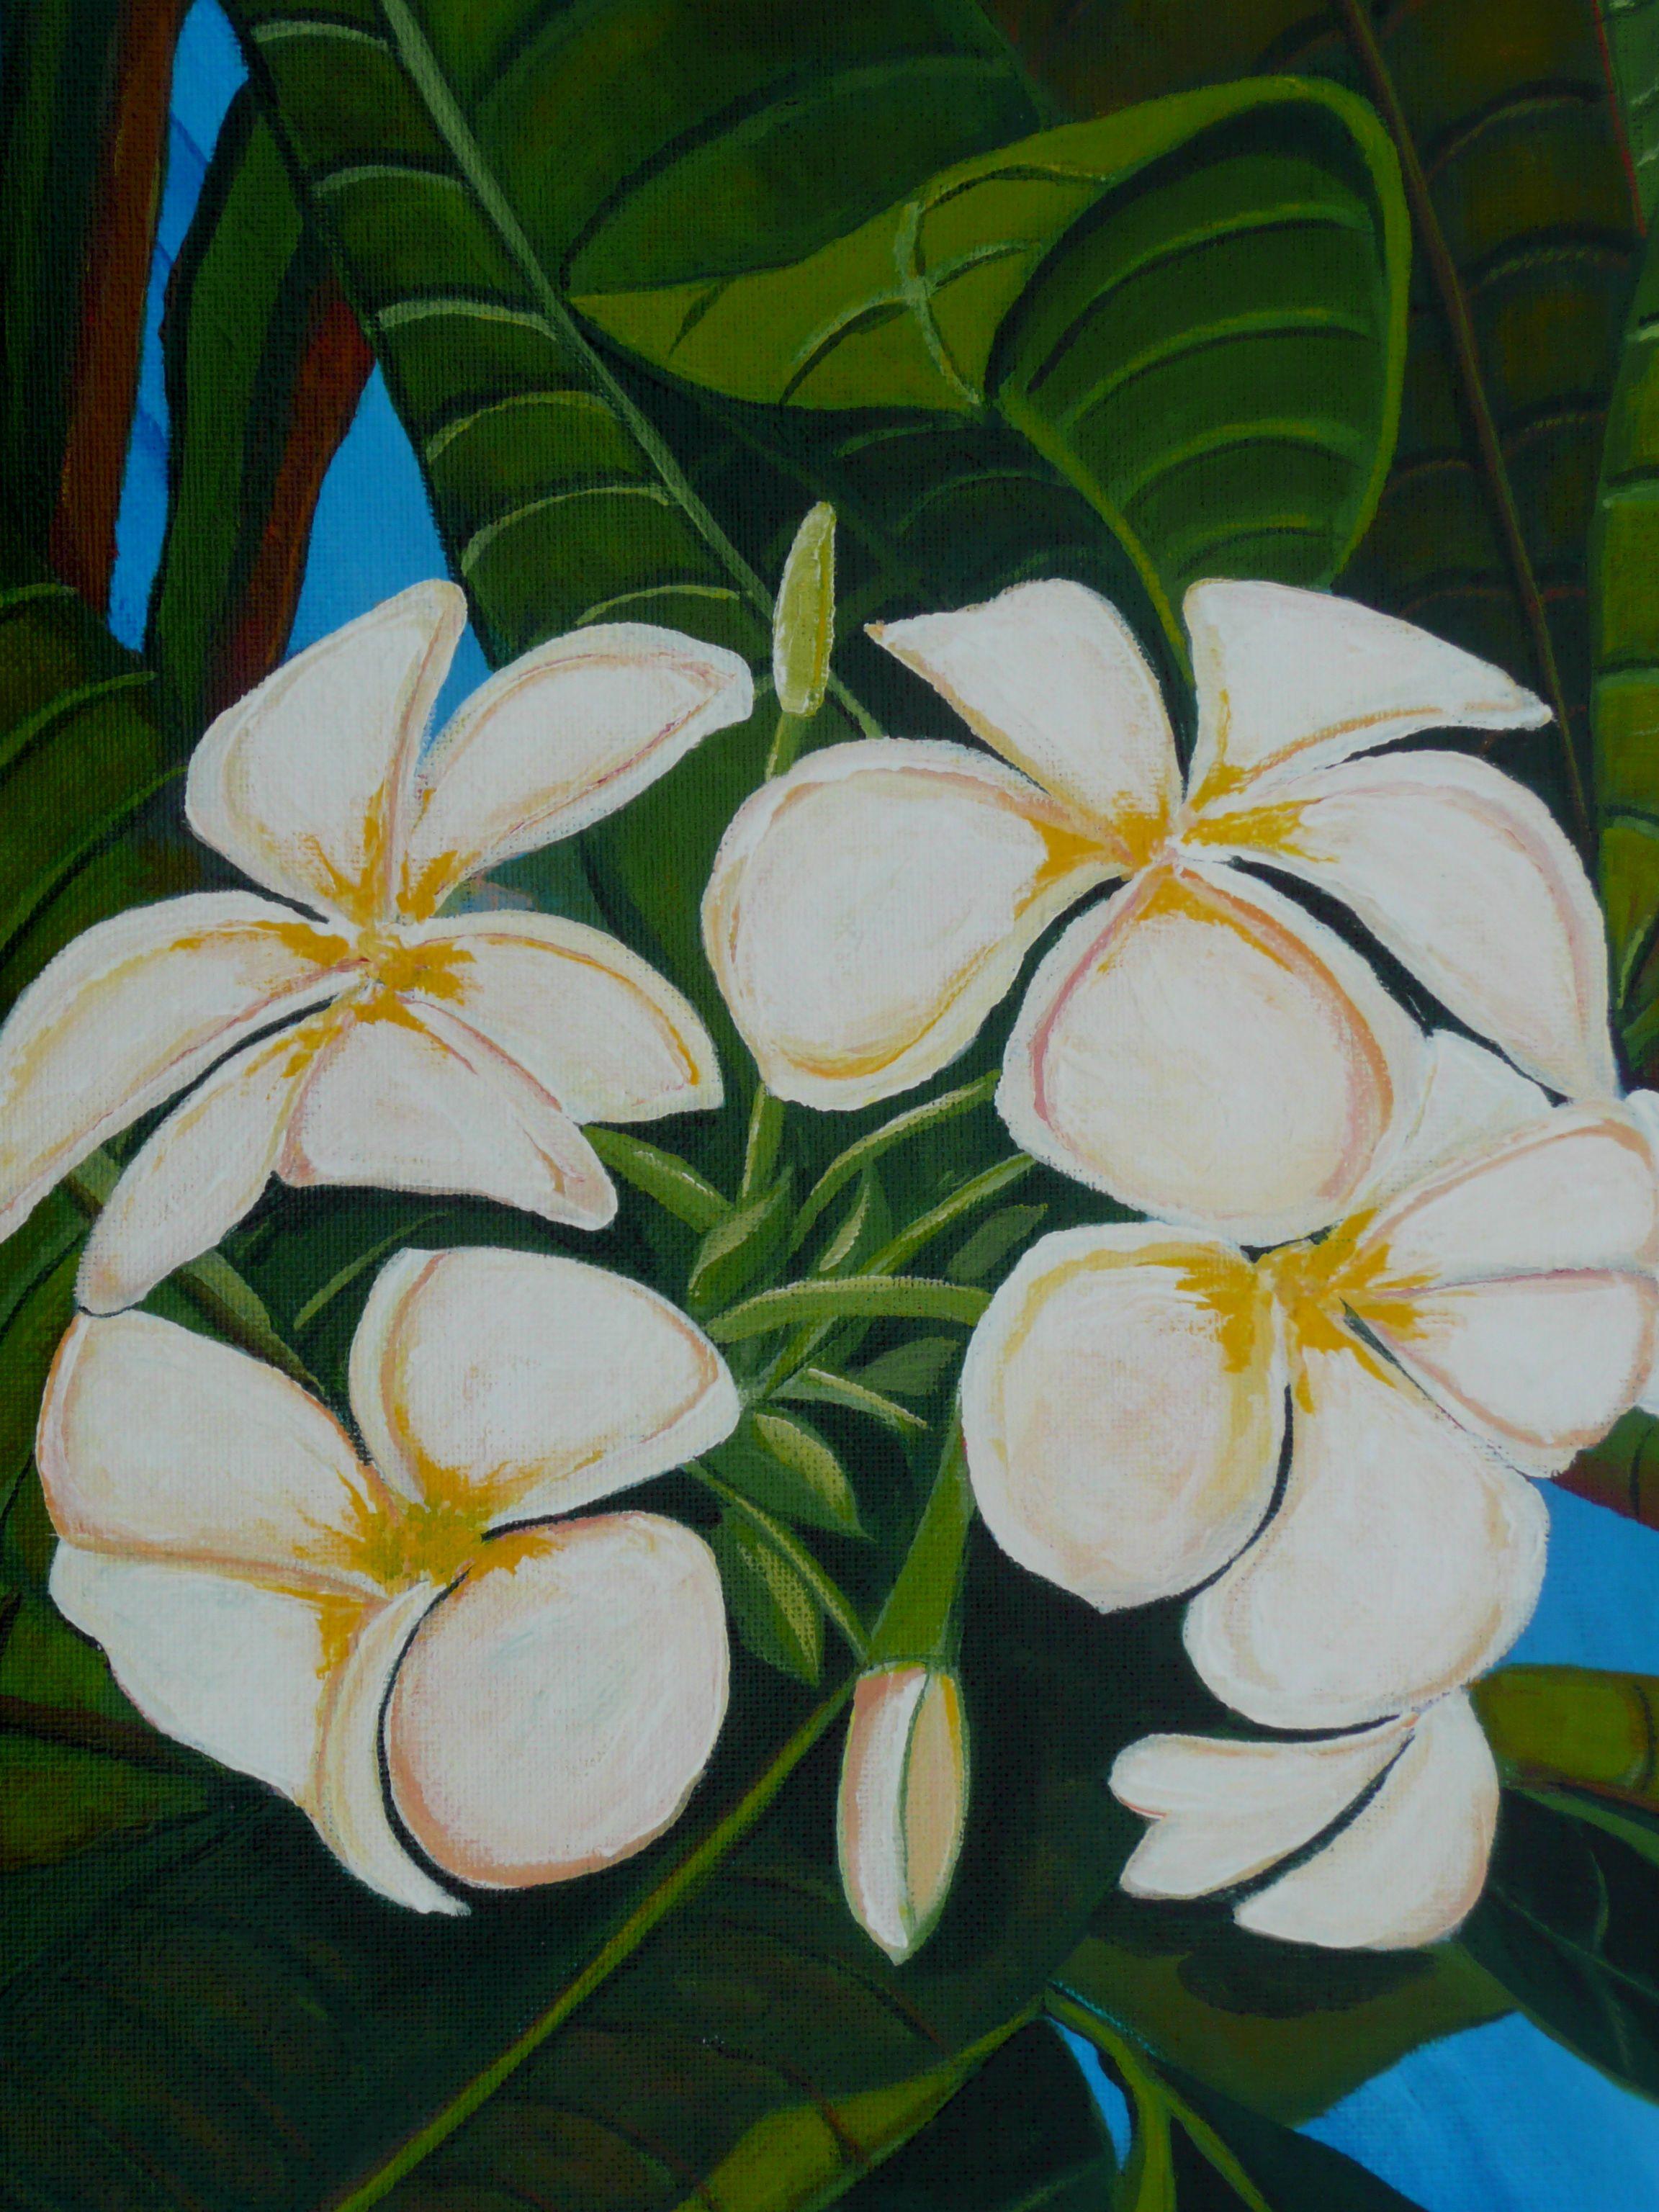 A cluster of frangipani in a tree. This tropical scene was captured on the island of Guam on my recent vacation there. These flowers are popular in Hawaii as well for making lei. This floral painting has been created using professional grade